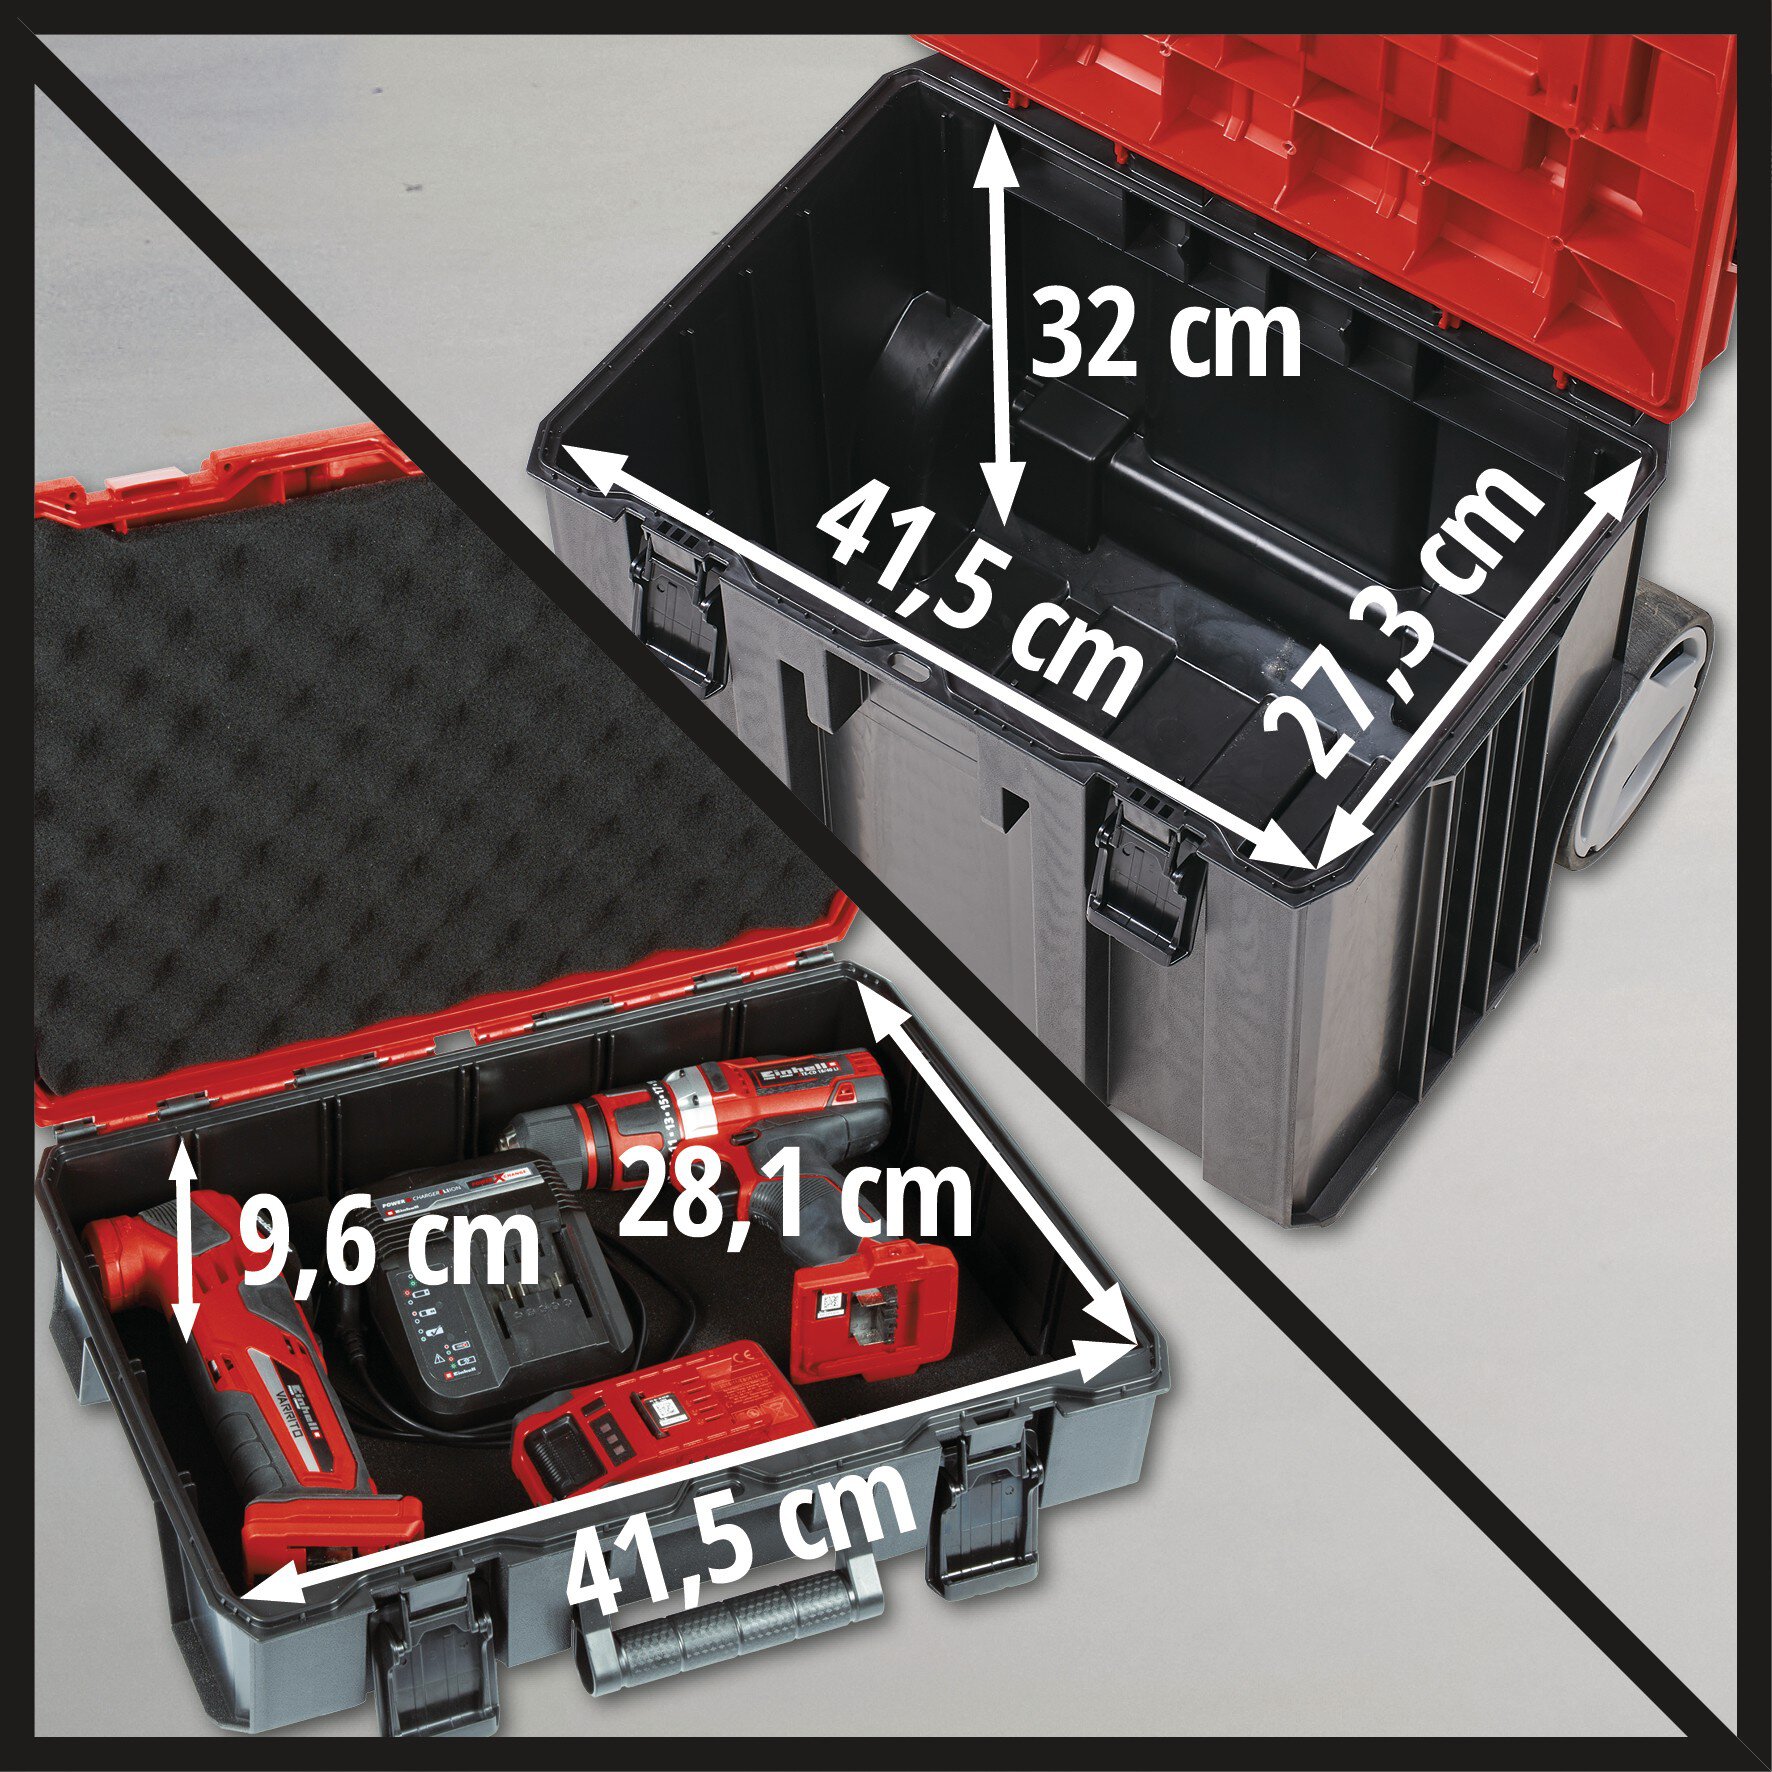 einhell-accessory-system-carrying-case-4540015-detail_image-003